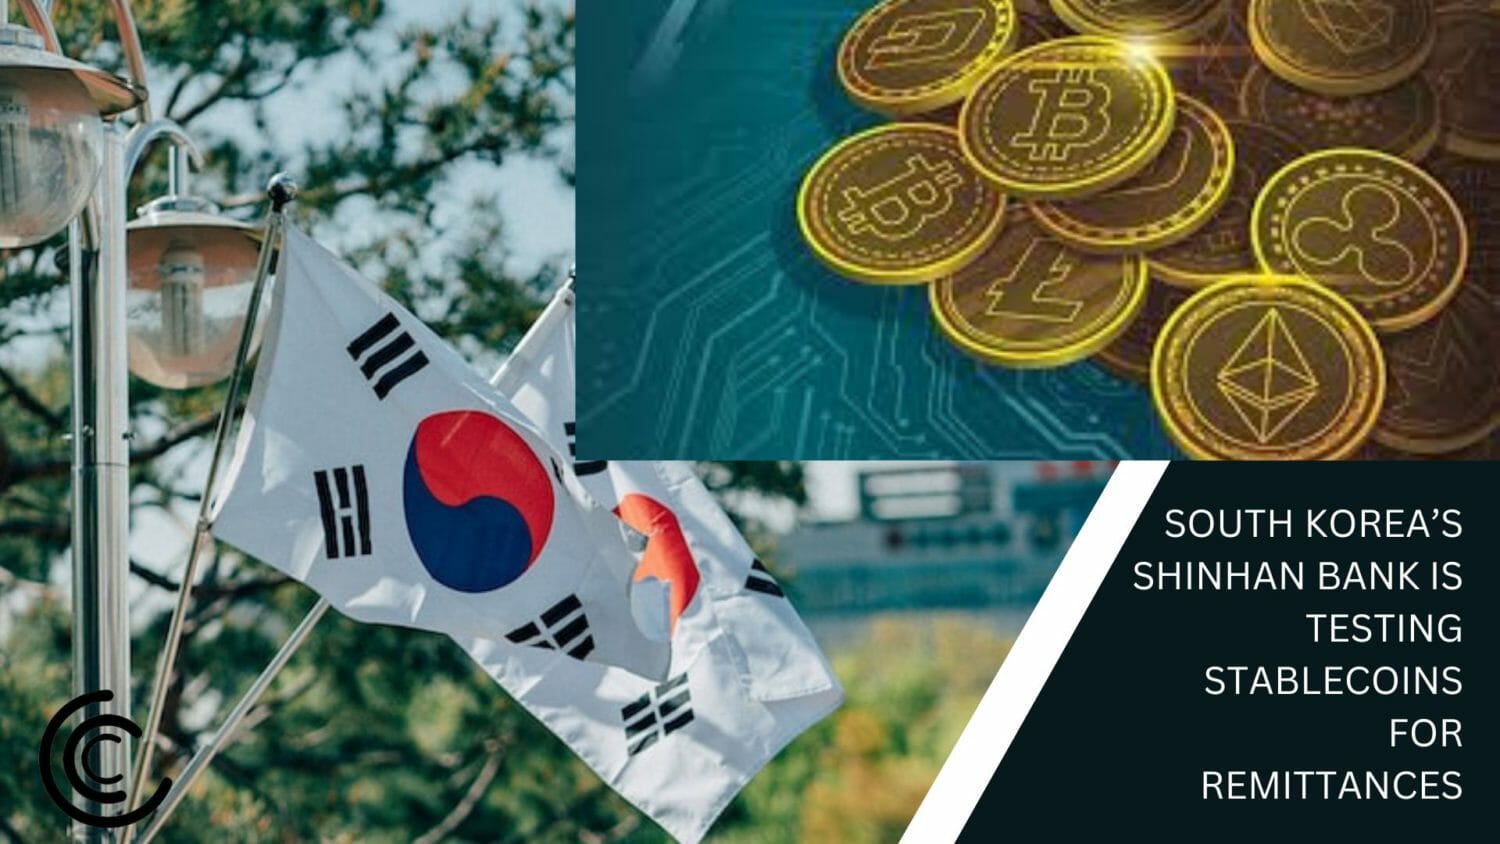 South Korea’s Shinhan Bank Is Testing Stablecoins For Remittances